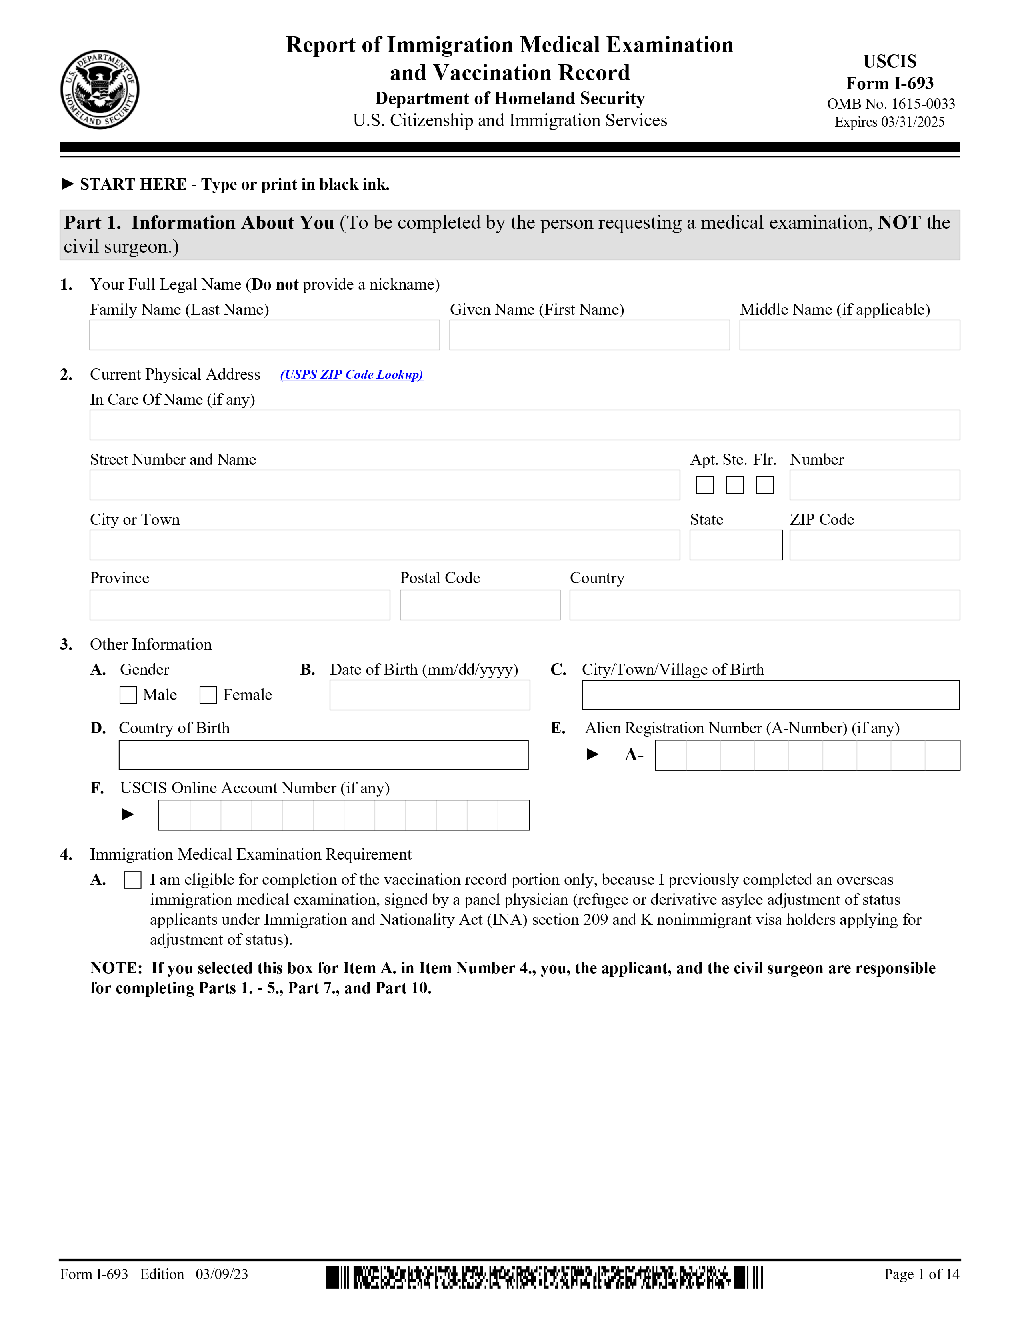 Form I693. Report of Immigration Medical Examination and Vaccination